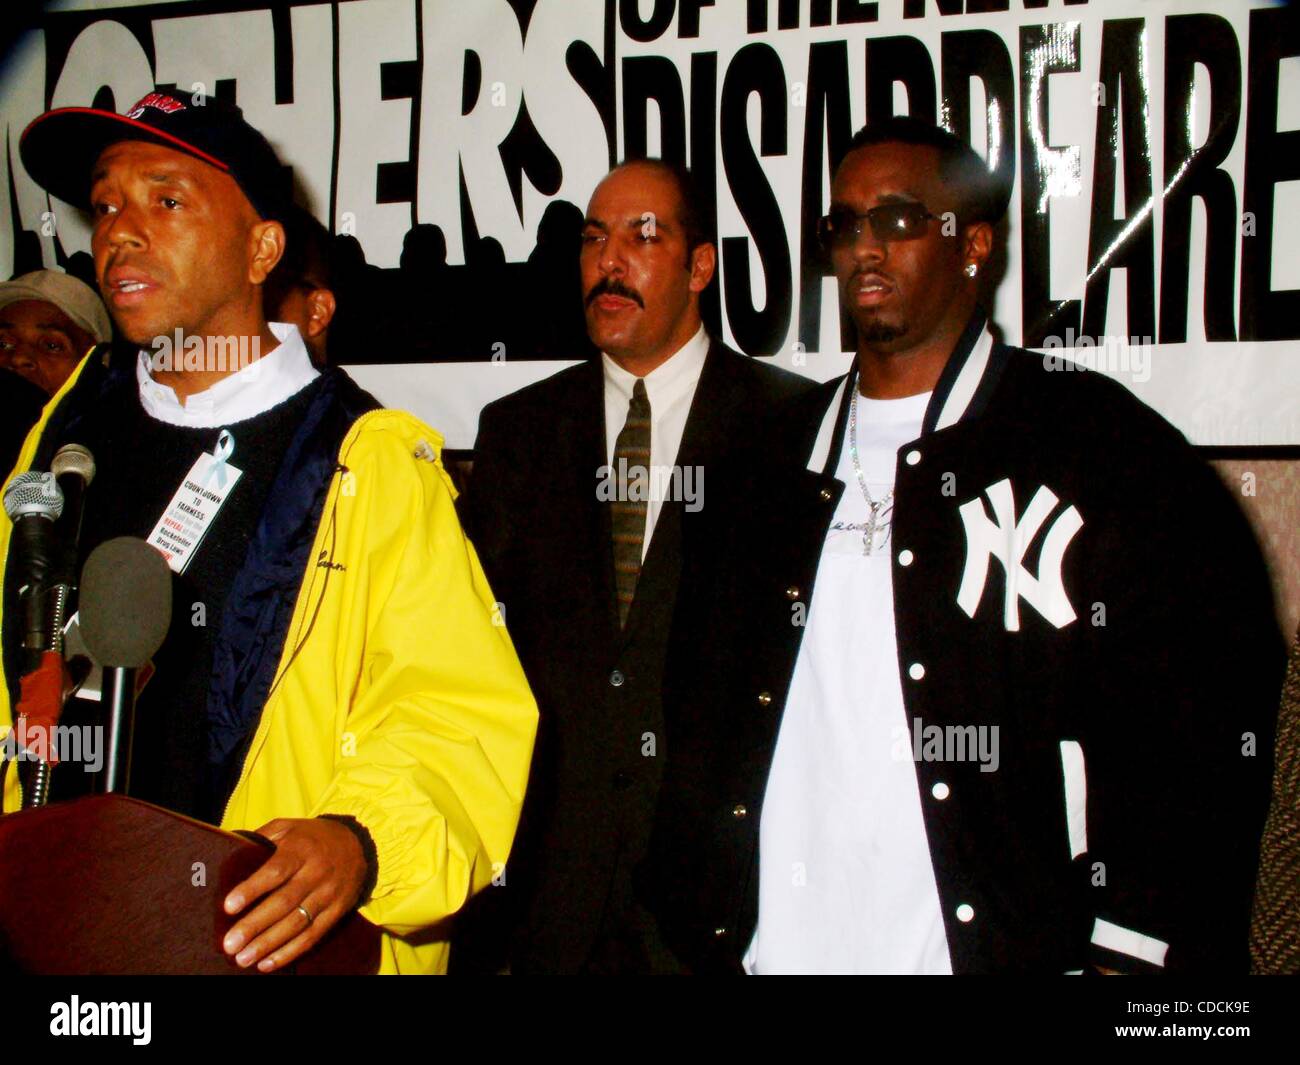 K30903ML. SD05/28/2003..RUSSELL SIMMONS, SEAN ''P. DIDDY'' COMBS ...